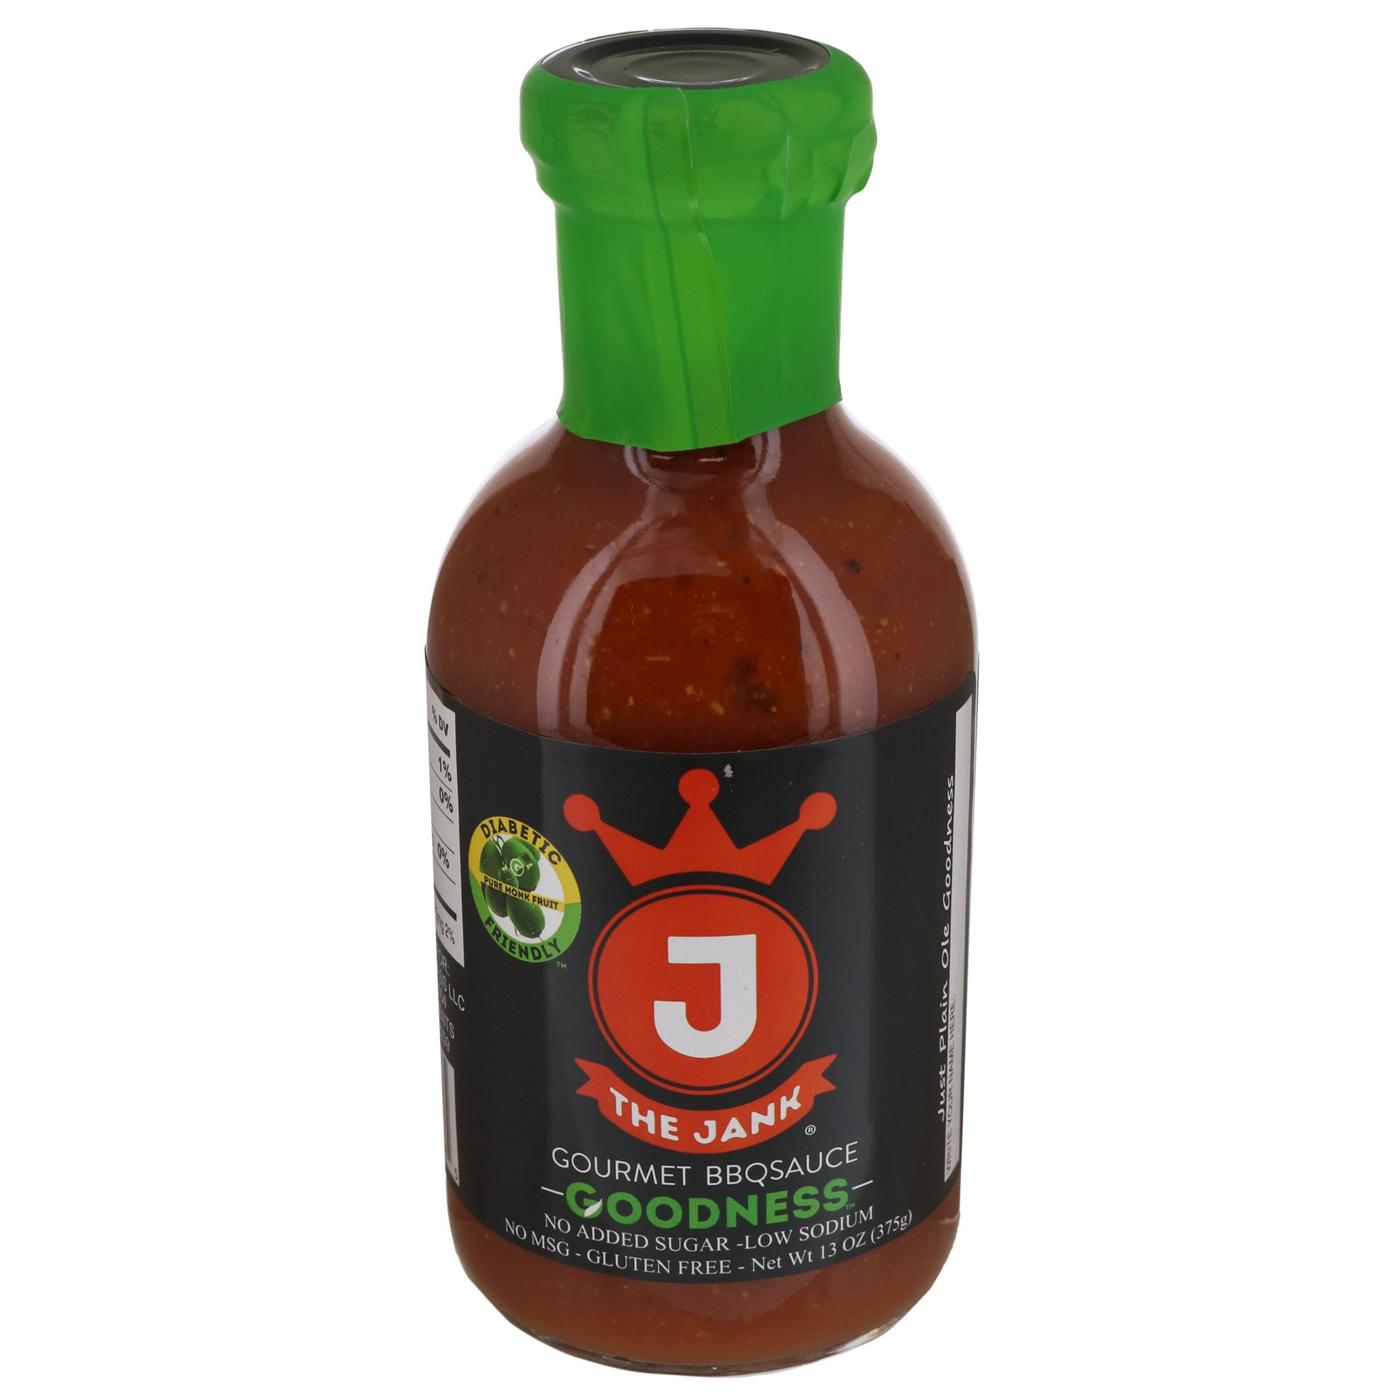 The Jank Gourmet BBQ Sauce - Goodness; image 1 of 5